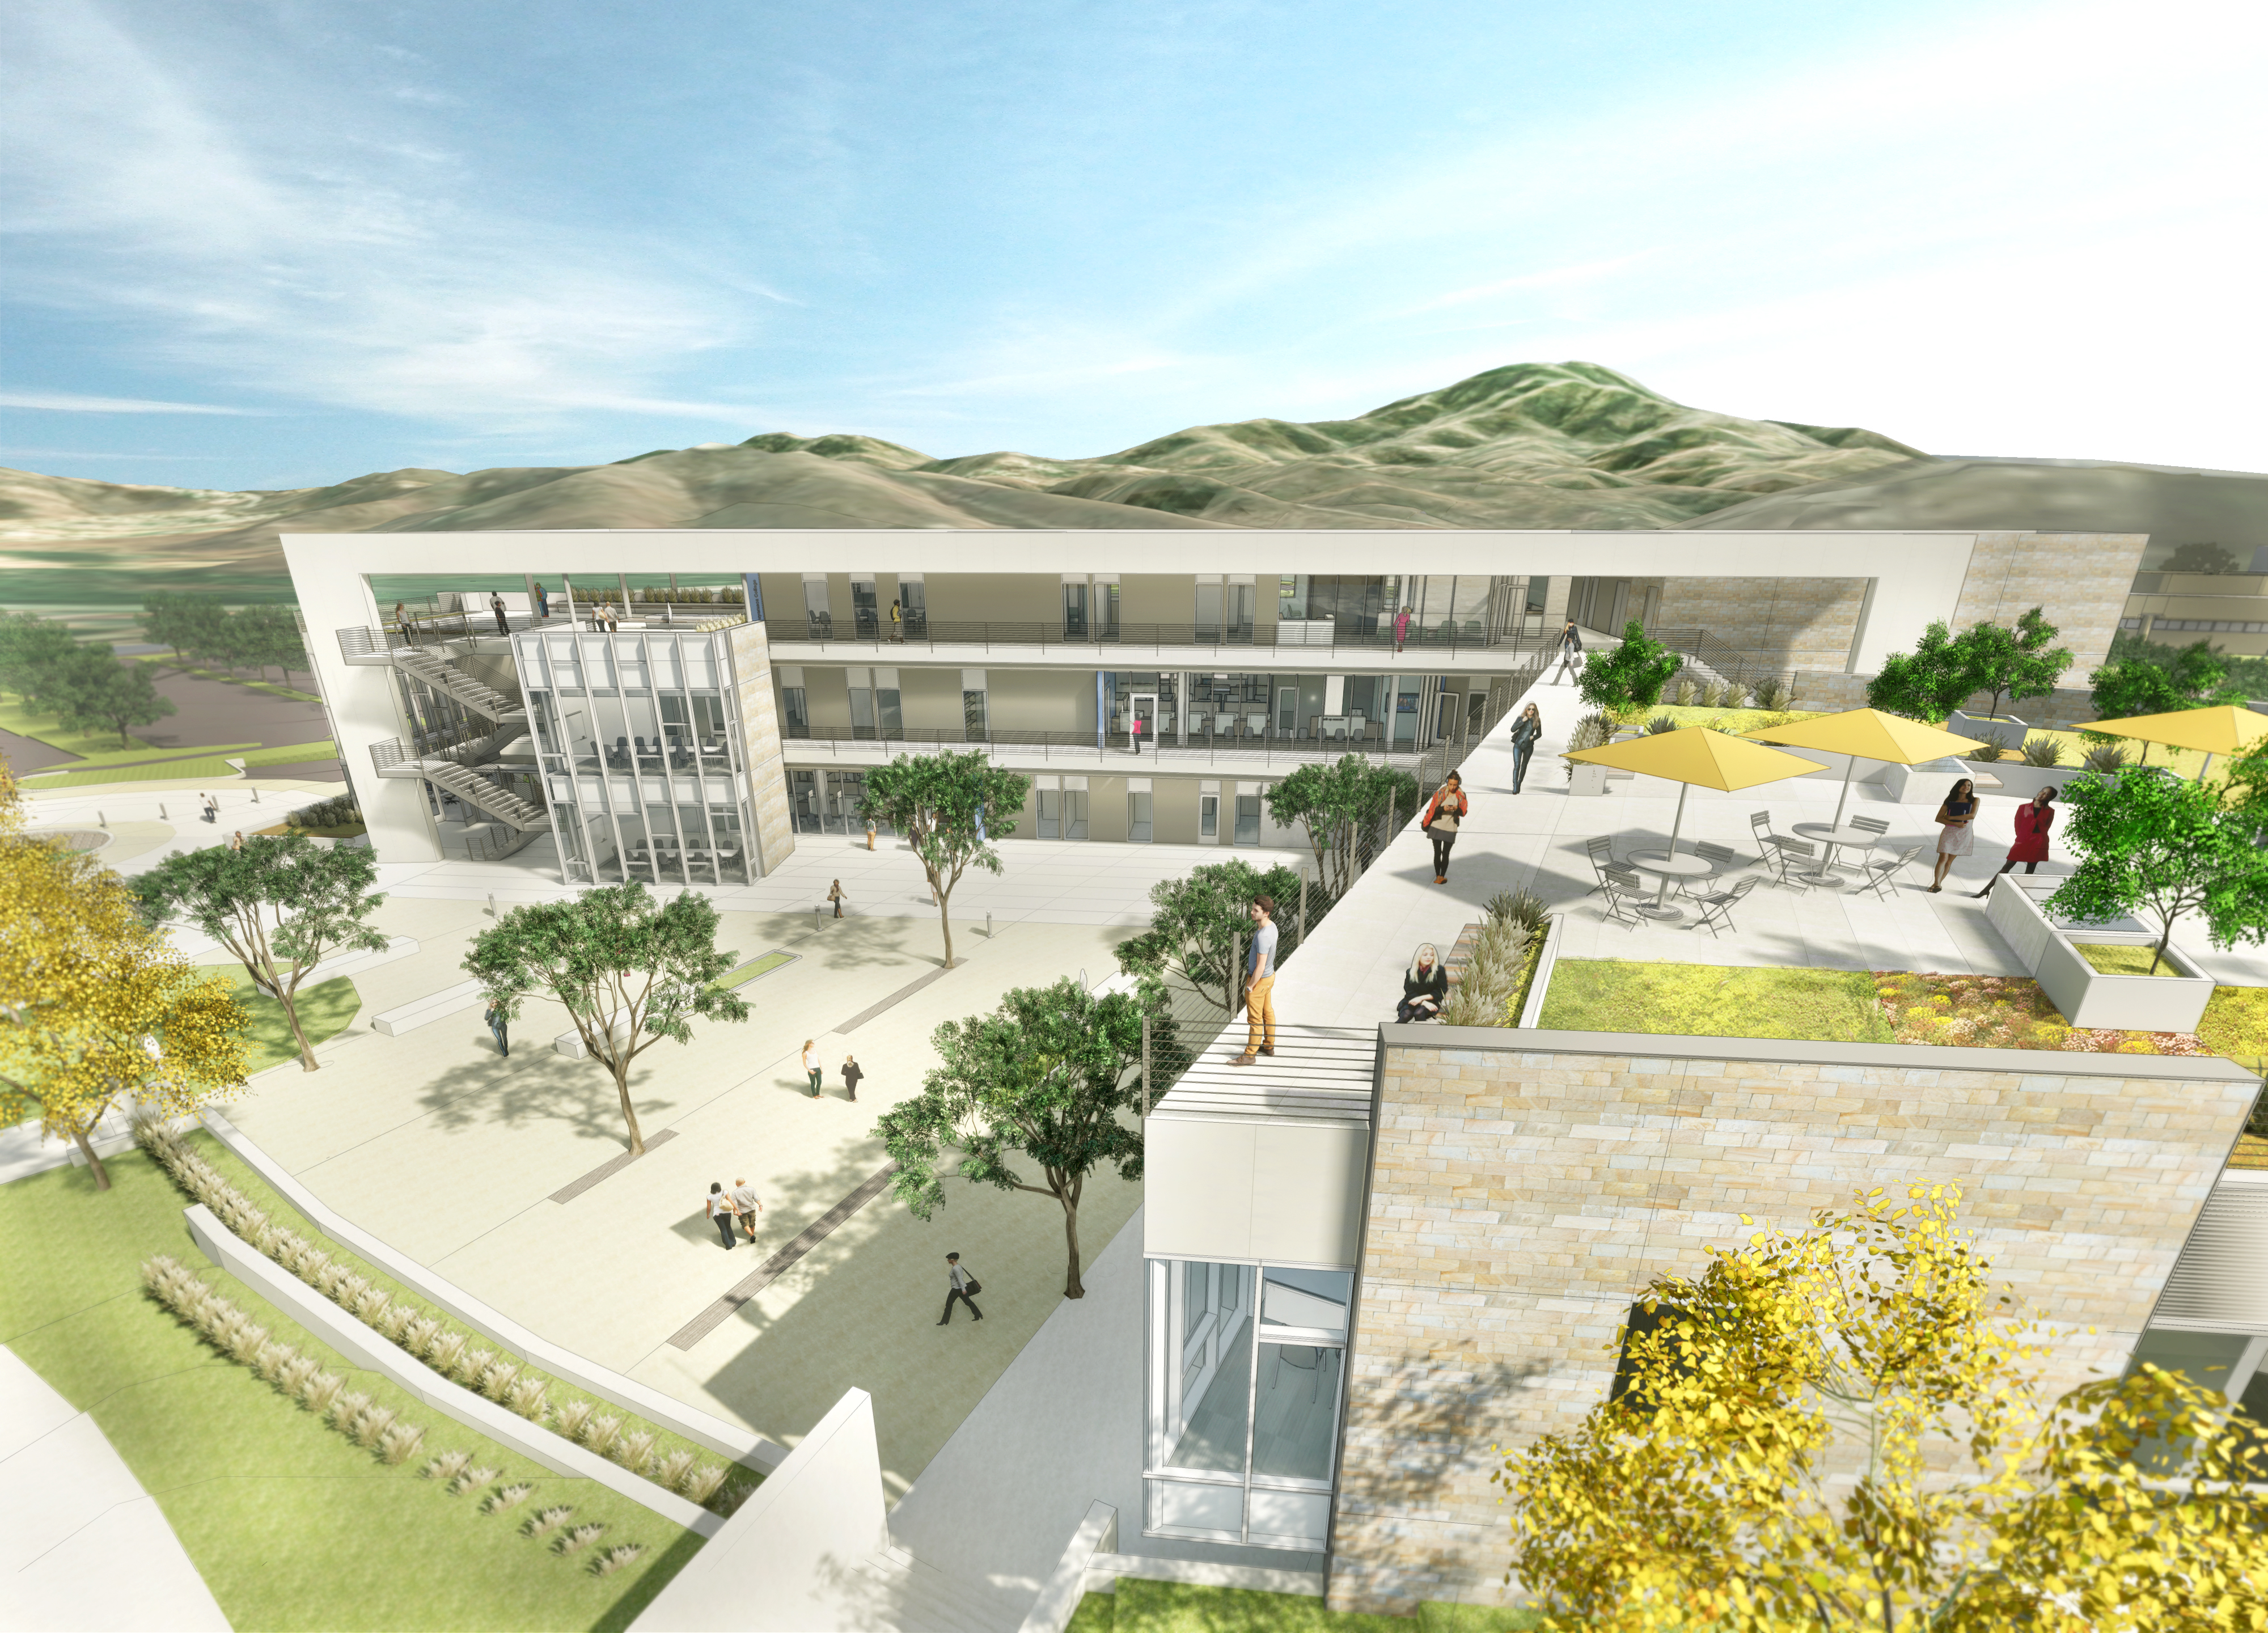 Green building design is integral to the New Cuyamaca College Student Services building.